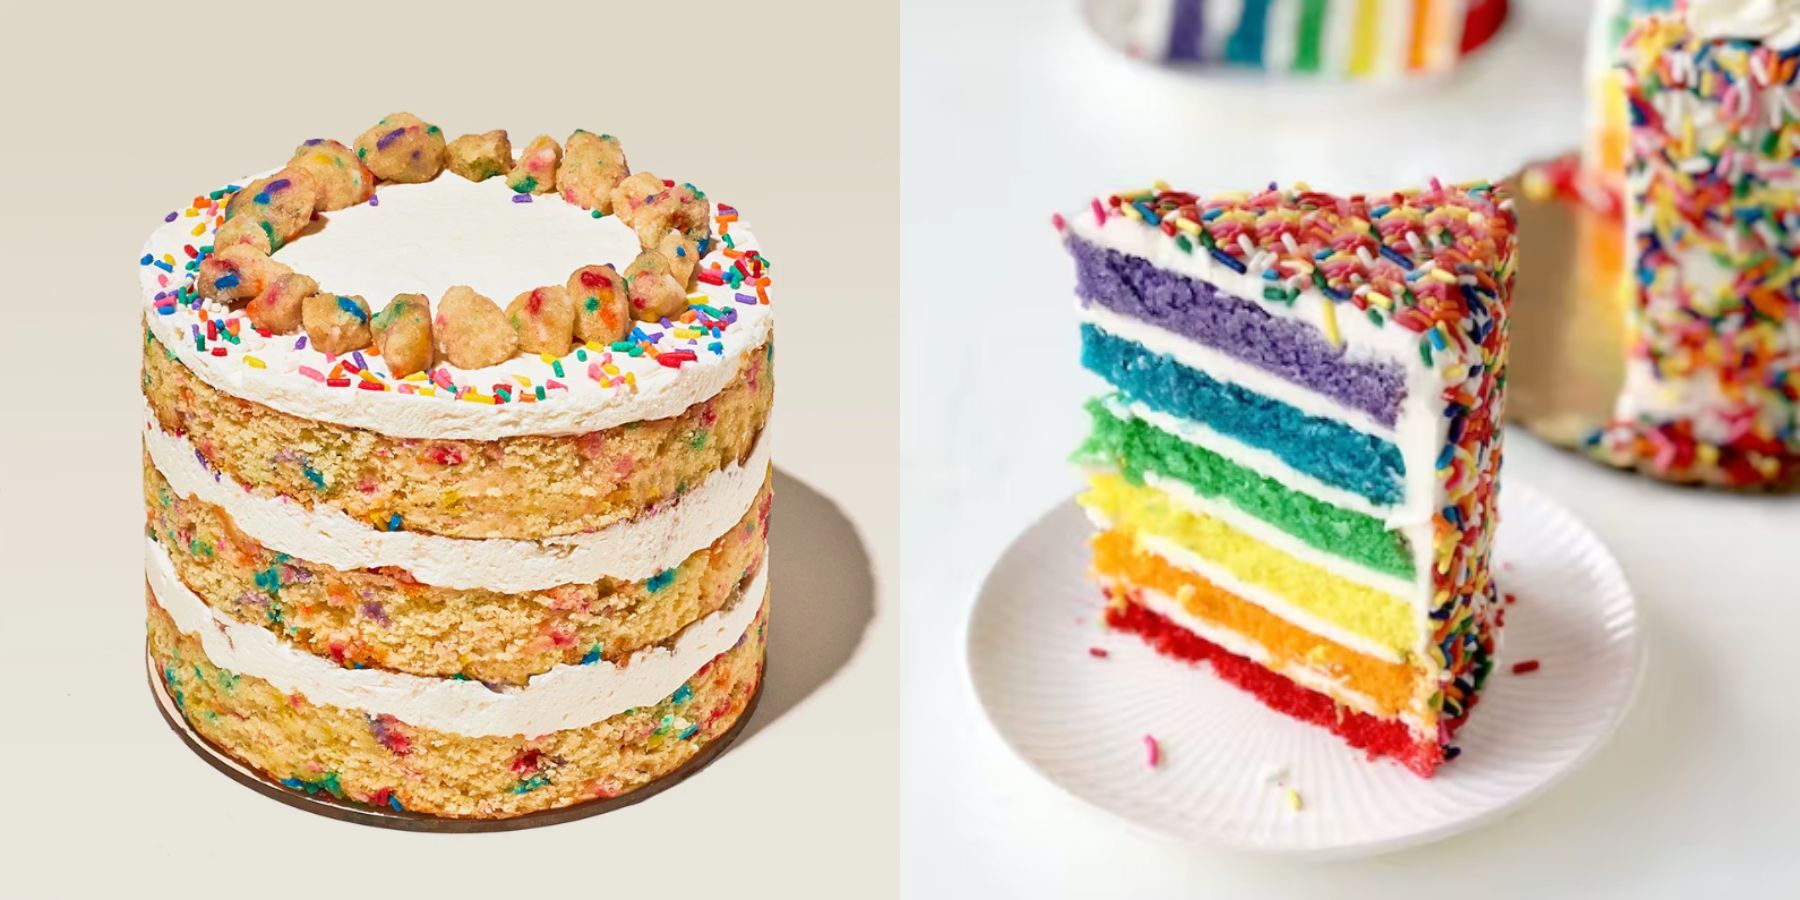 Birthday Cakes Online Is the Best with Secret Recipe. Here's Why